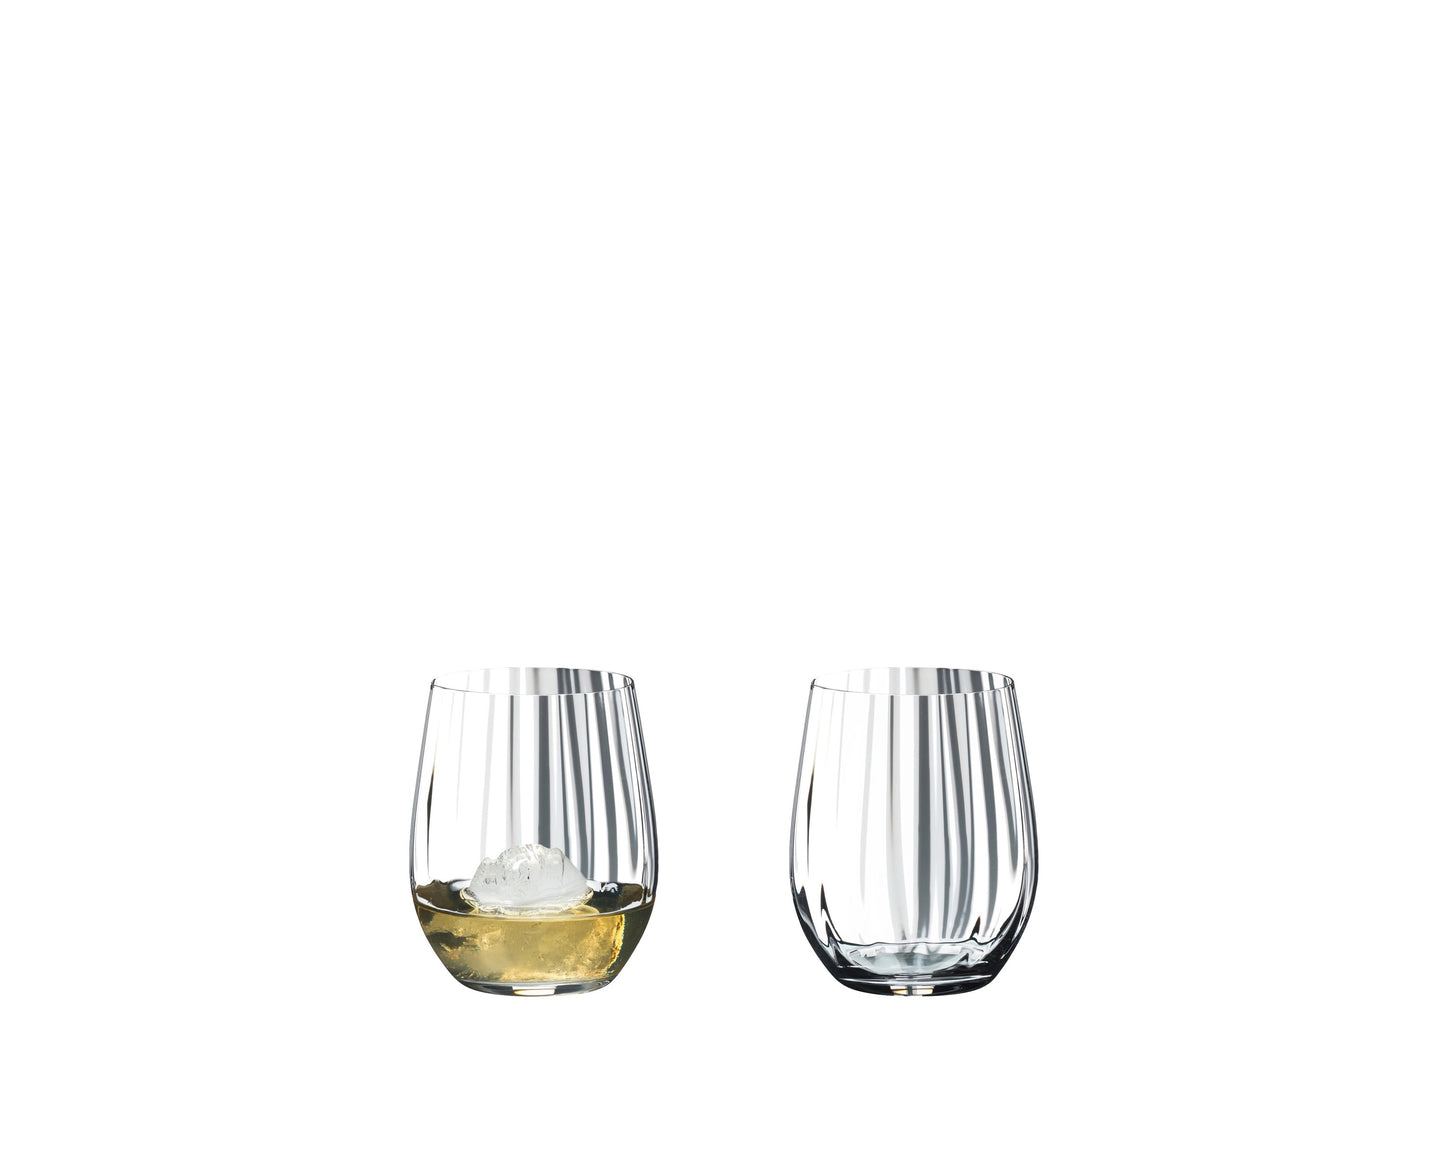 Riedel Optical O Whisky Tumbler Collection